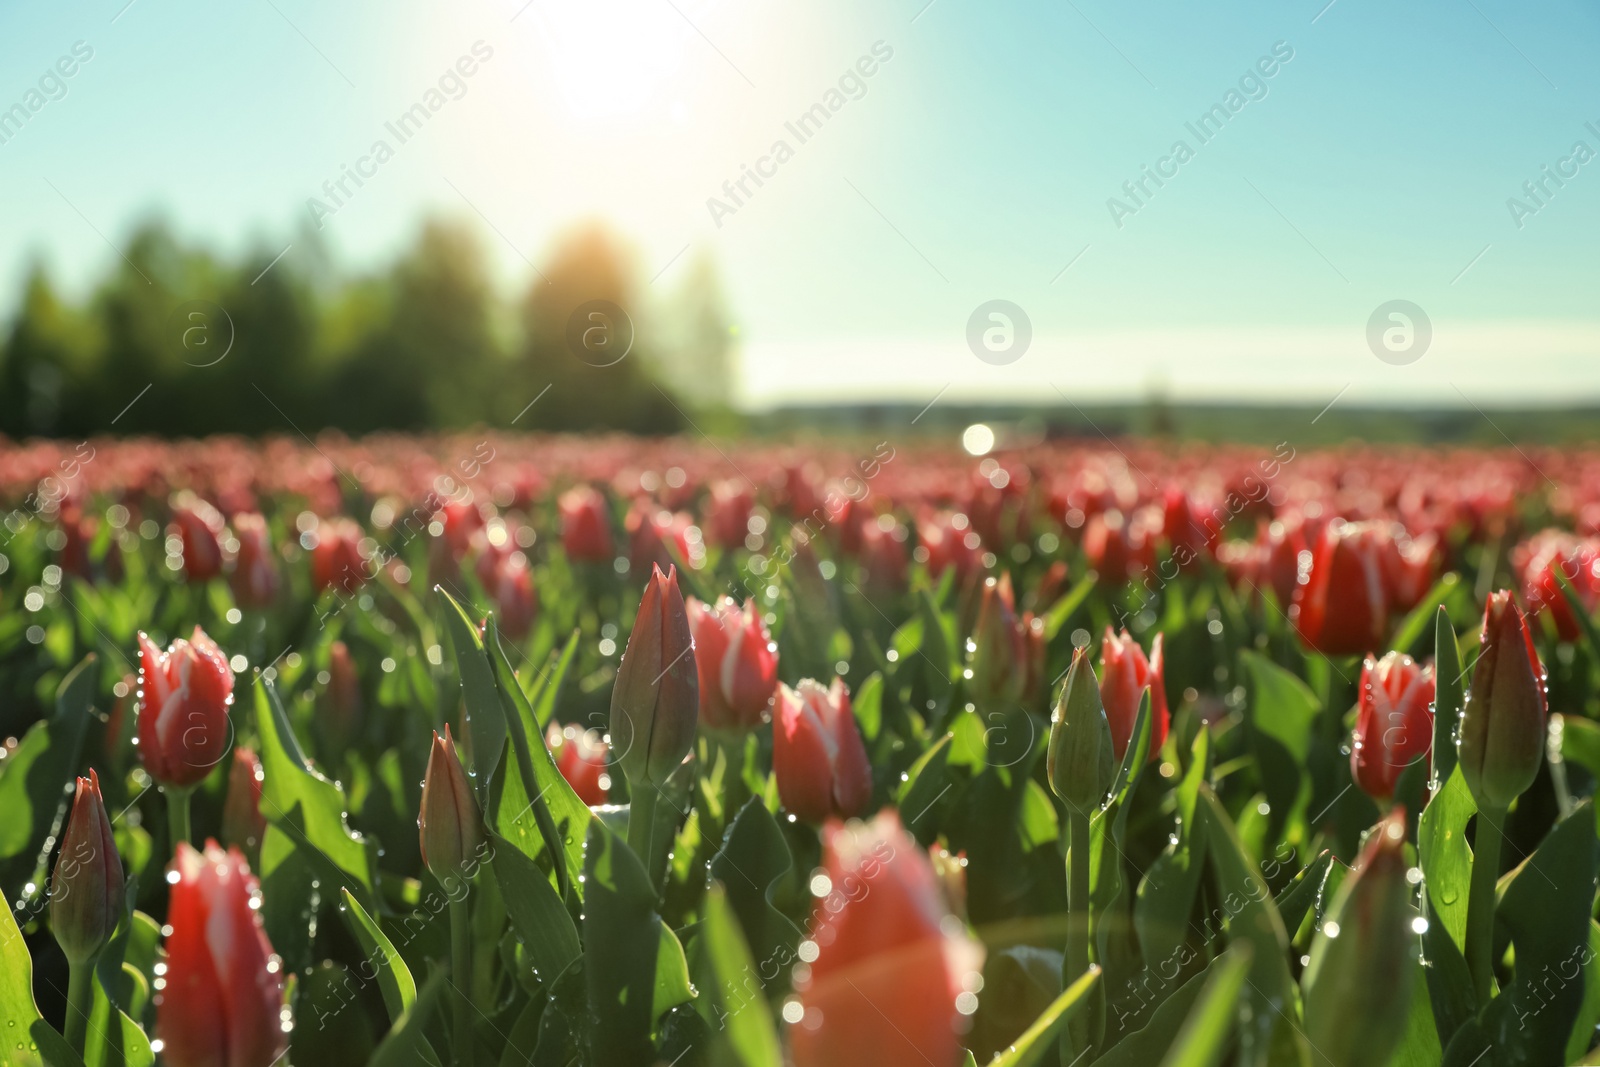 Photo of Blossoming tulips with dew drops in field on spring day